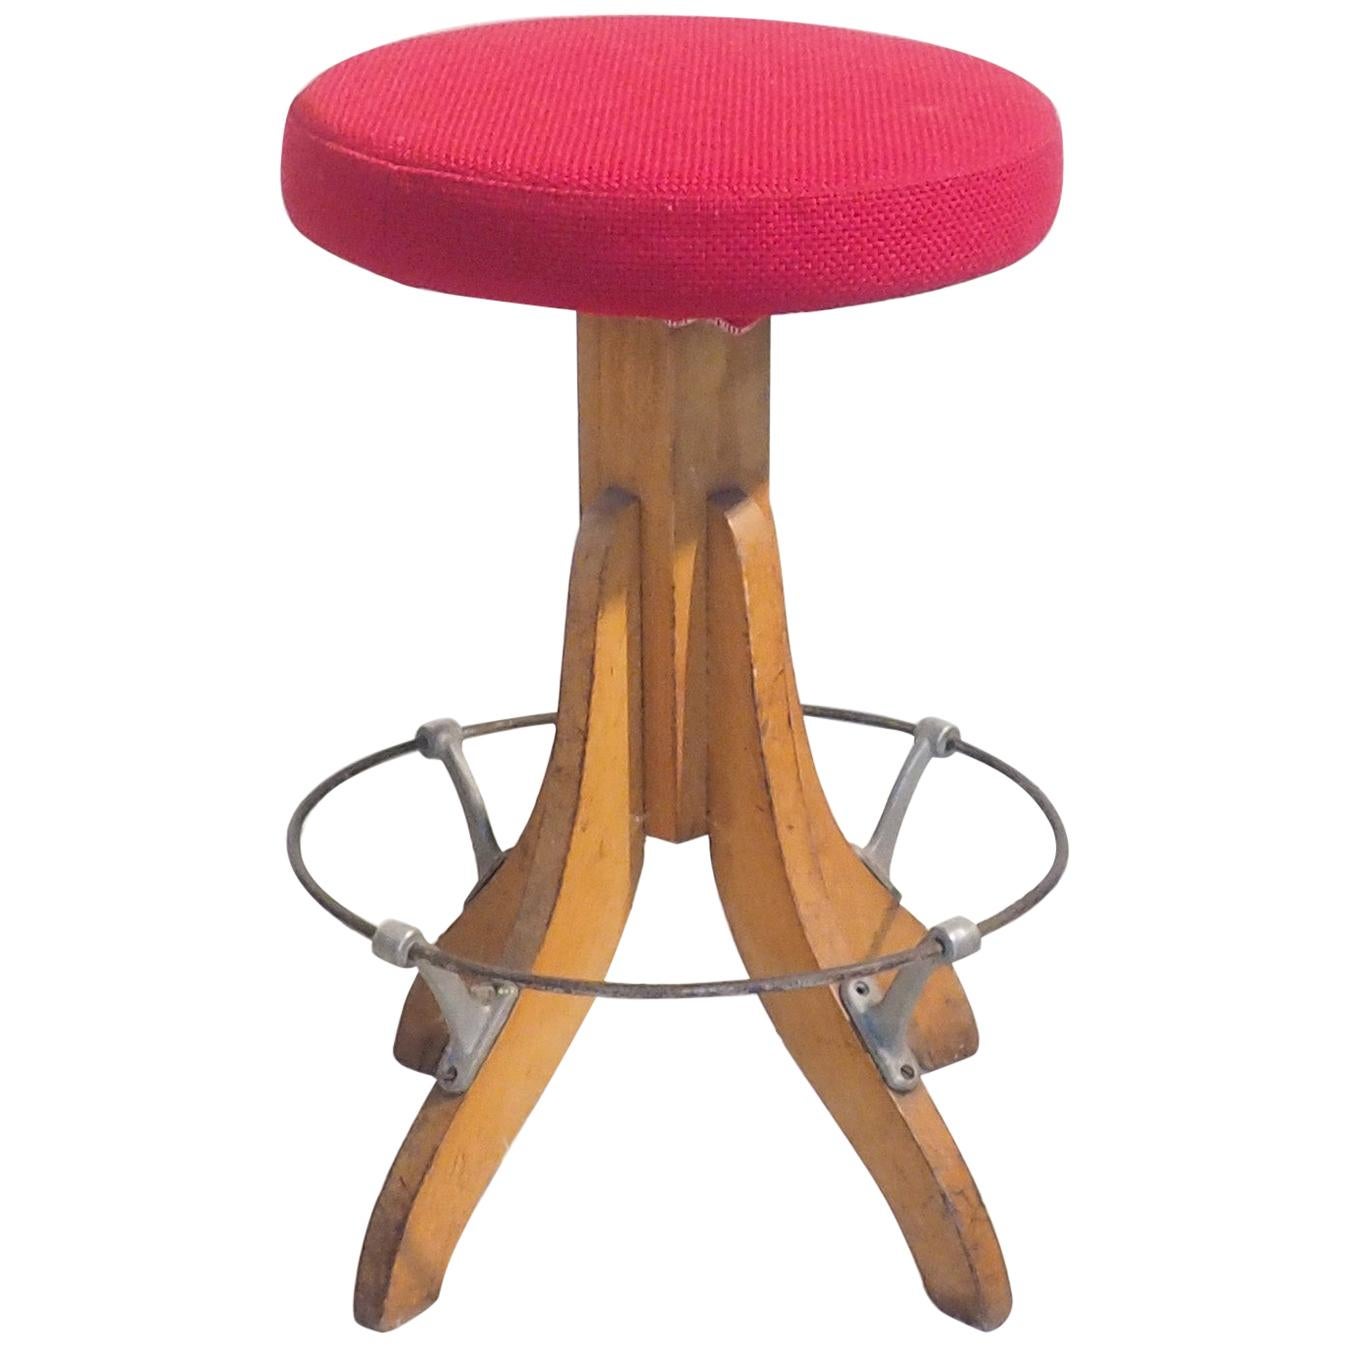 Mid-Century Modern Italian Adjustable Stool Tripode Wood Base with Red Round Top